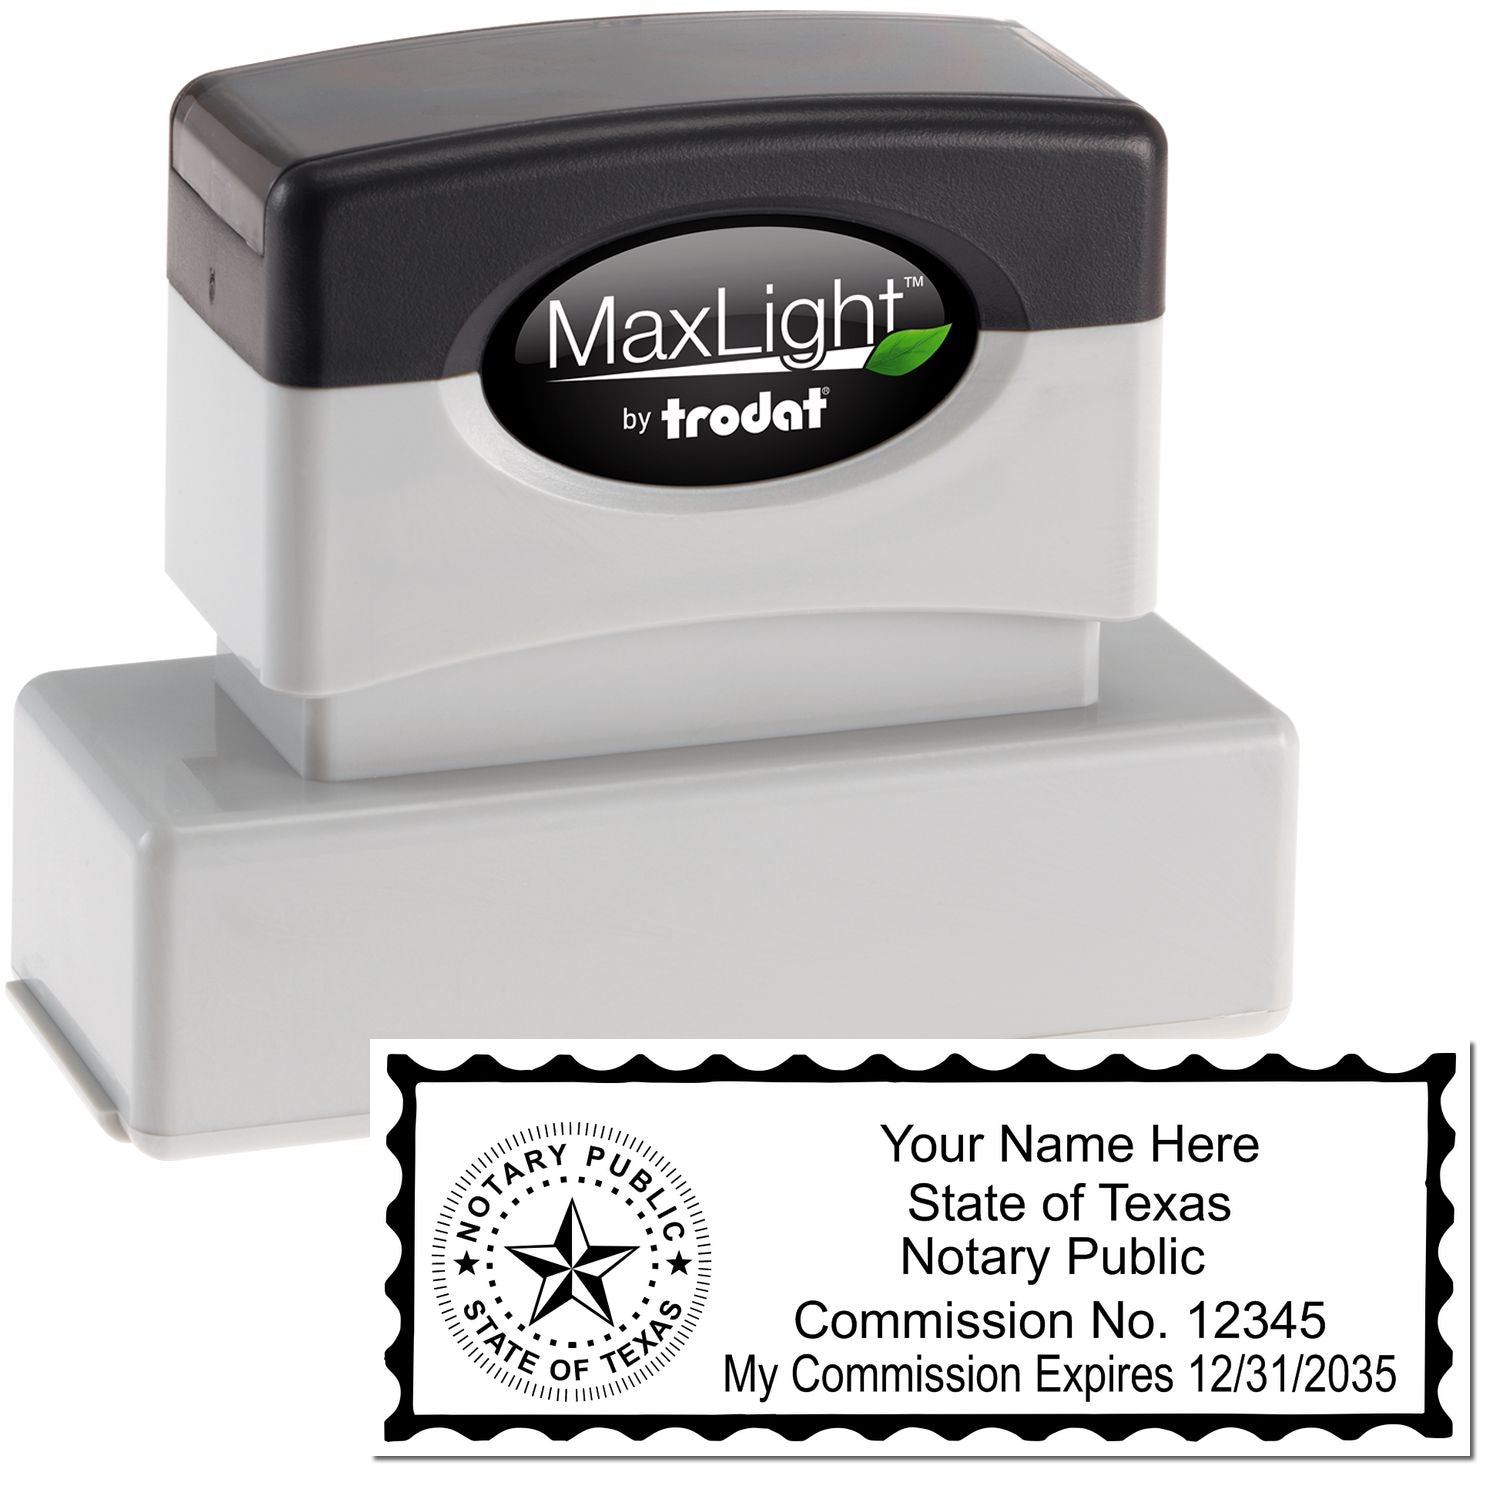 The main image for the MaxLight Premium Pre-Inked Texas State Seal Notarial Stamp depicting a sample of the imprint and electronic files